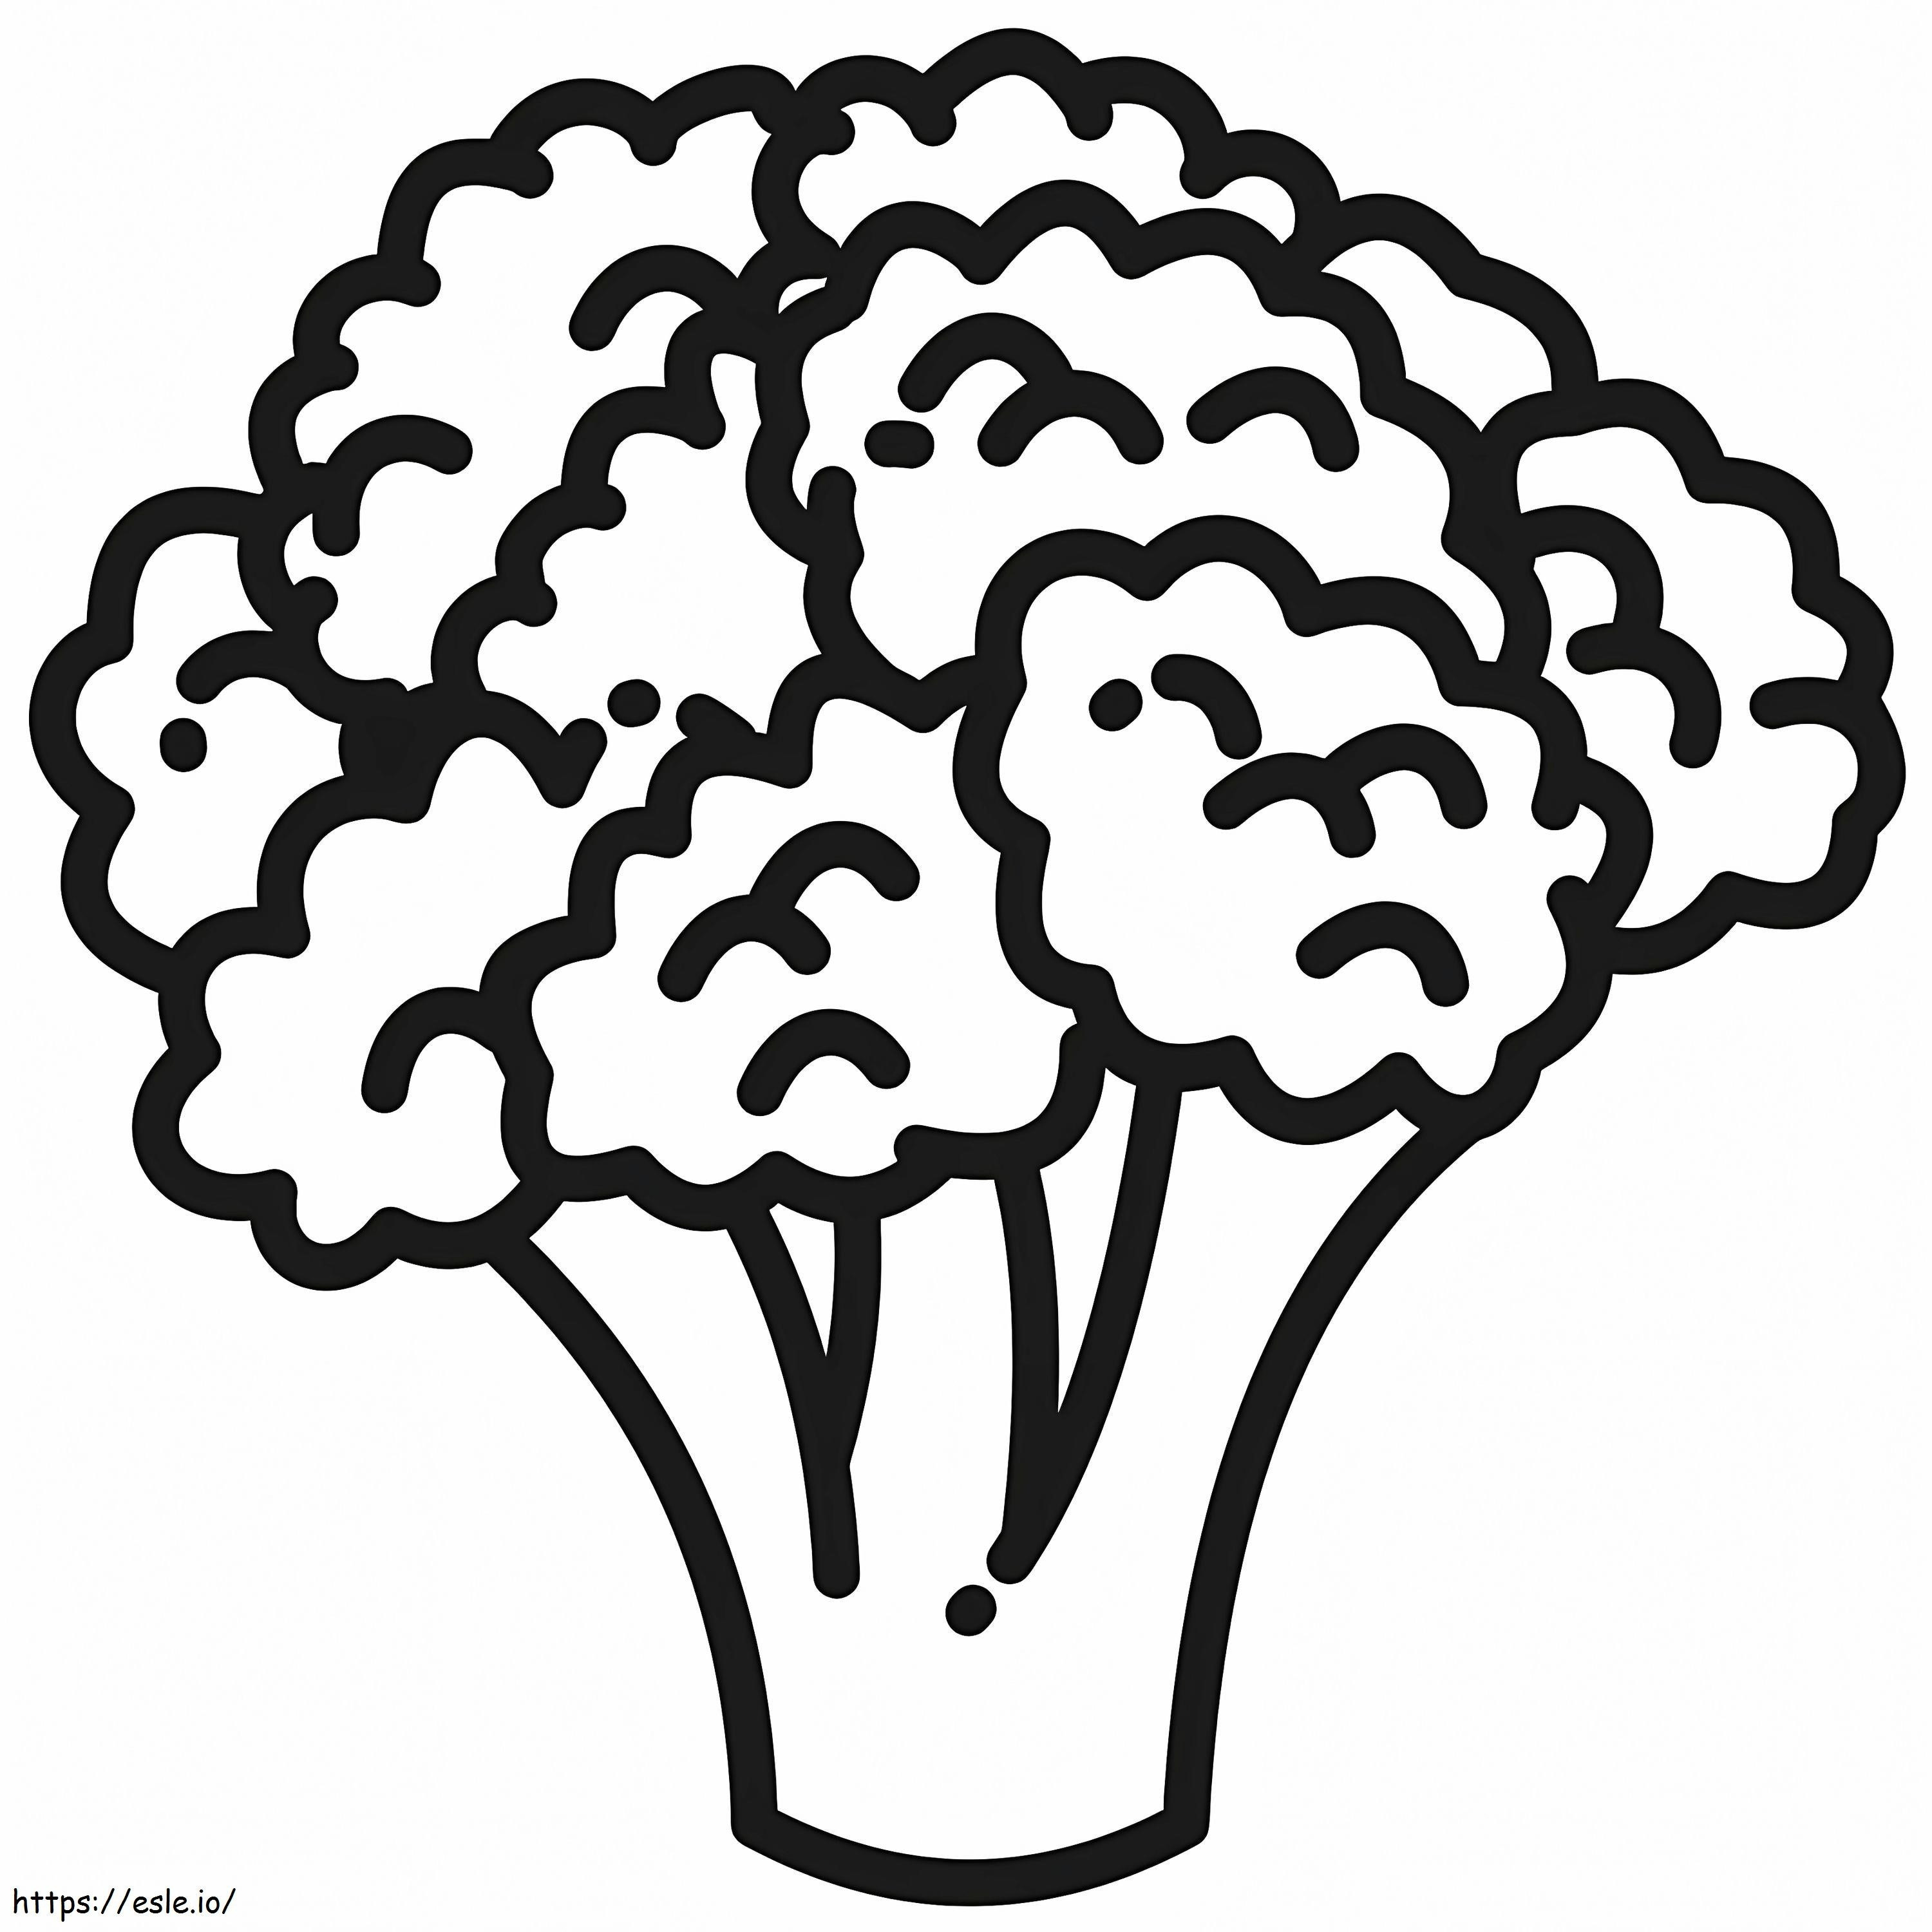 Easy Cauliflower coloring page